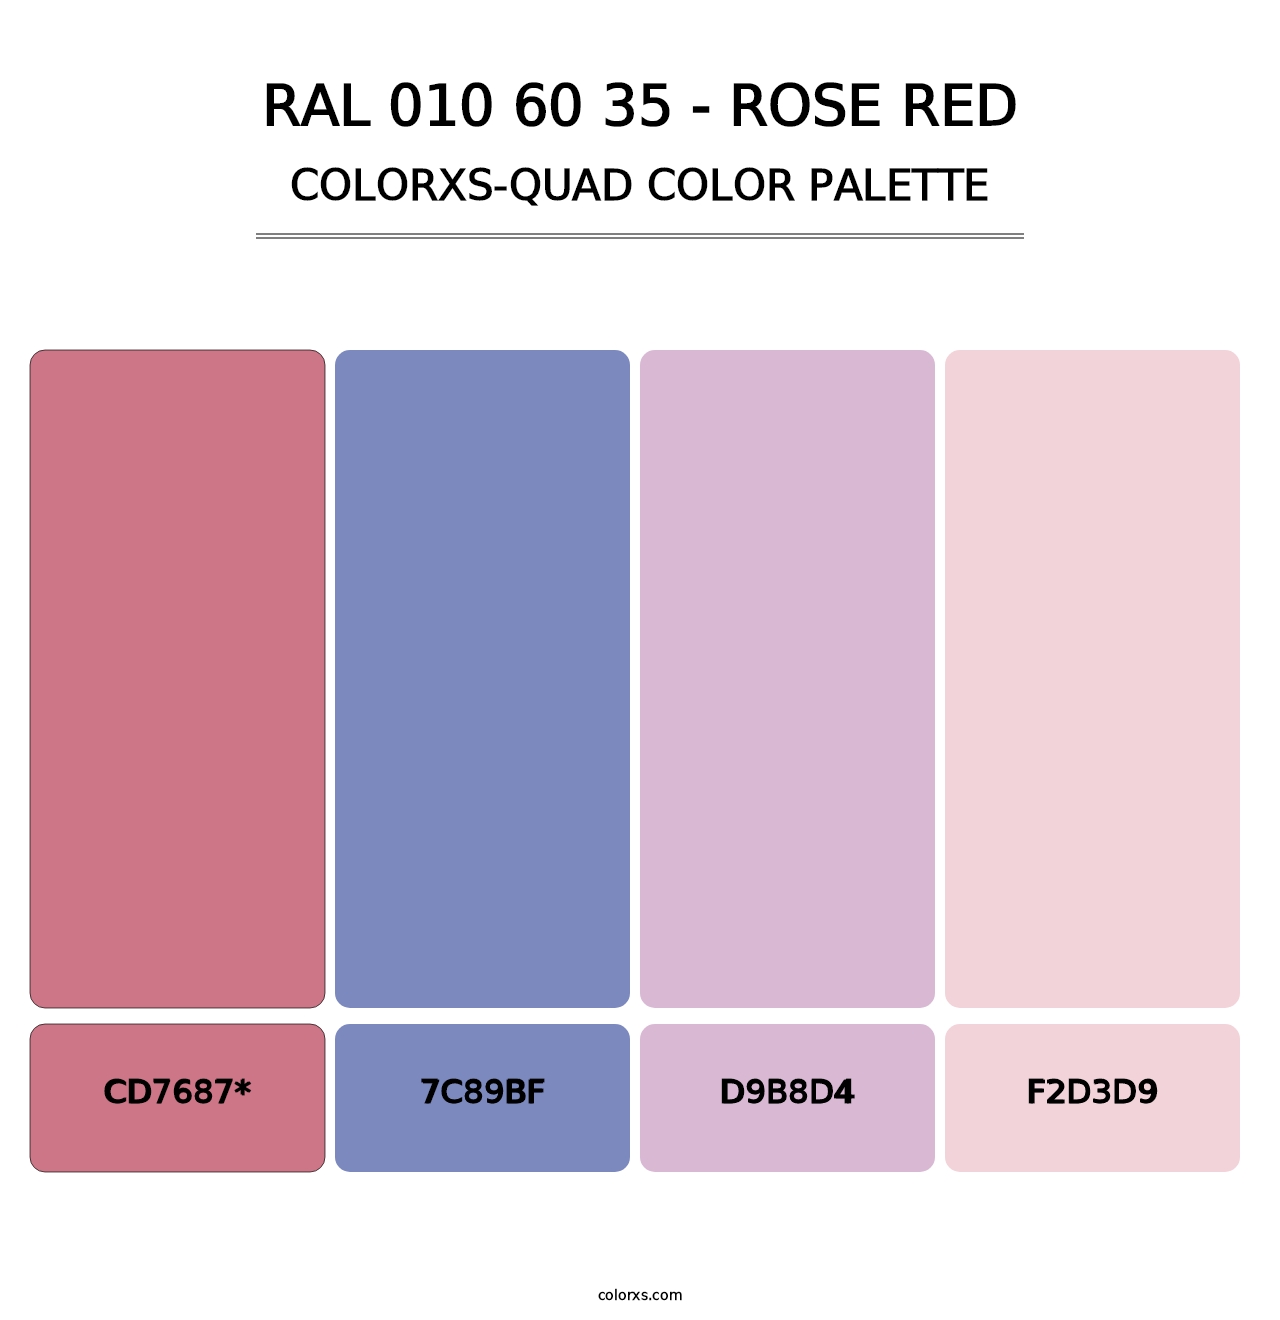 RAL 010 60 35 - Rose Red - Colorxs Quad Palette